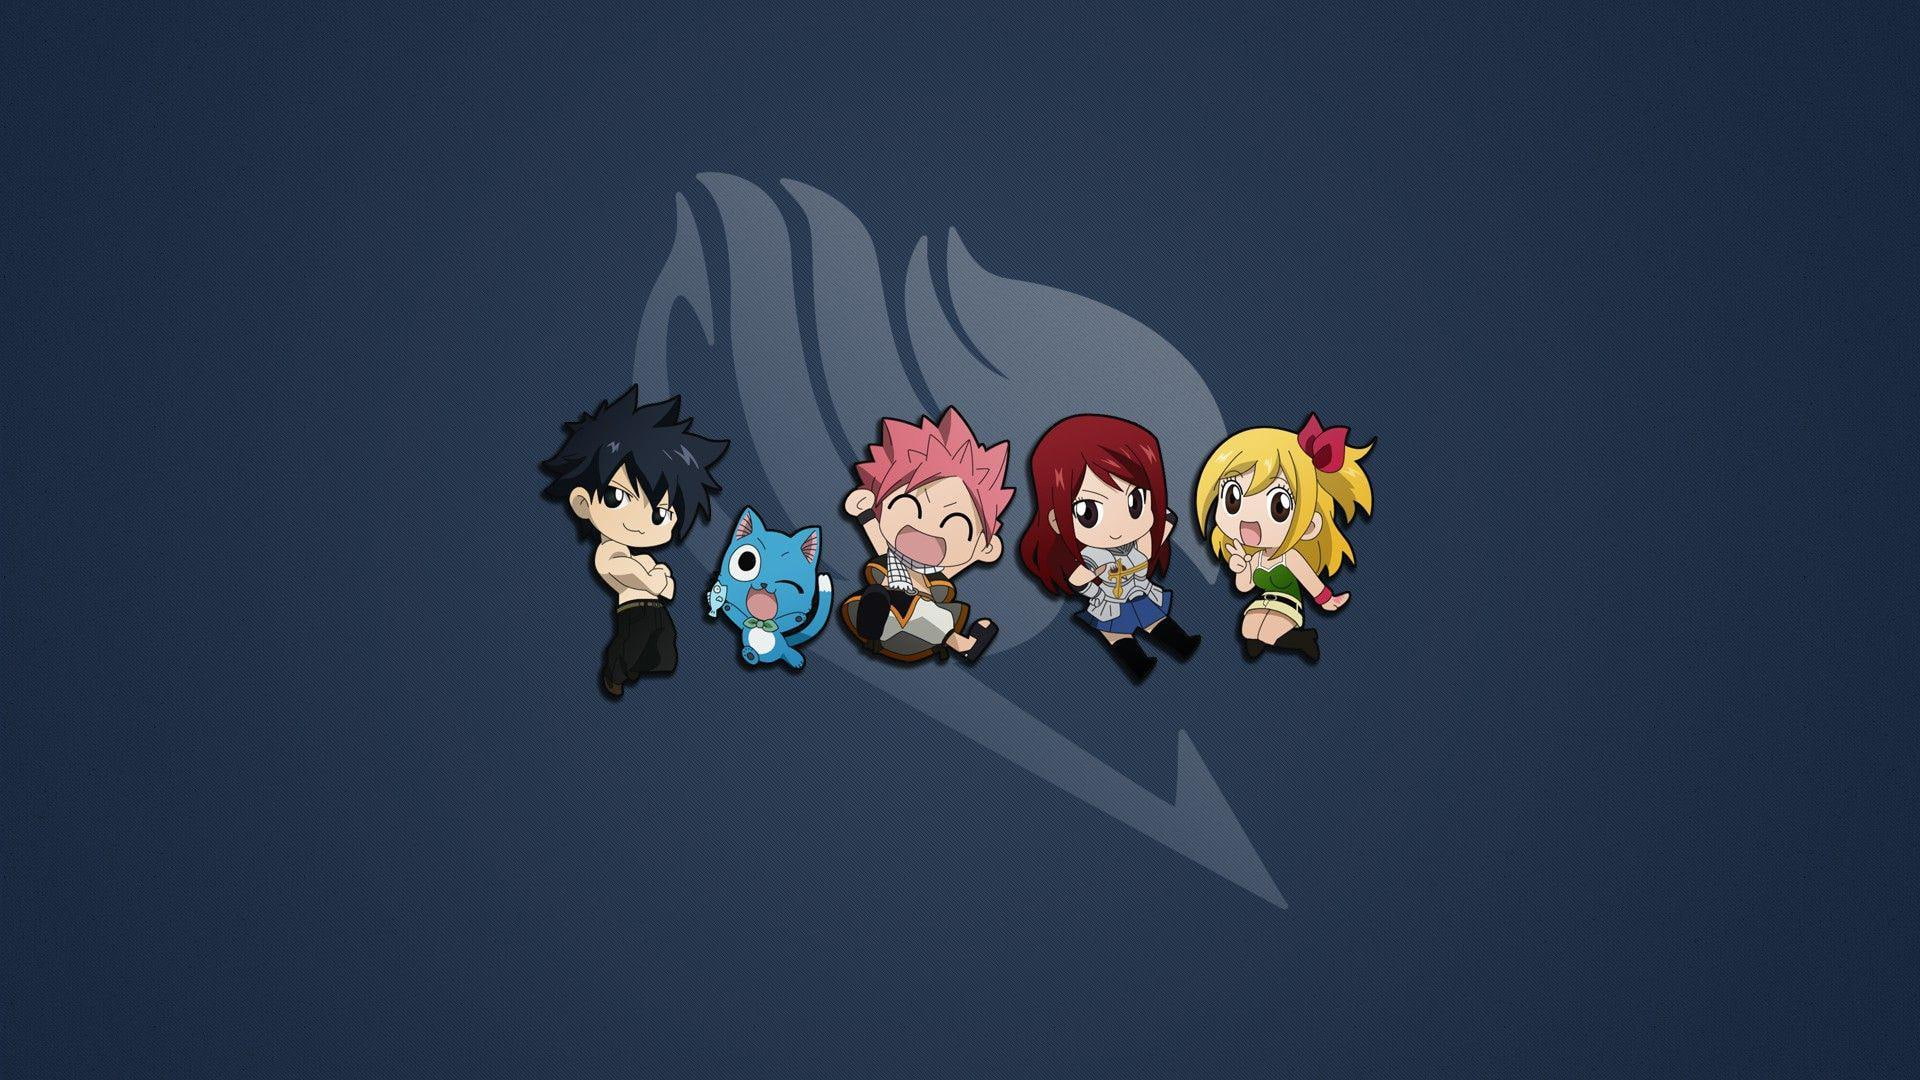 Cute Fairy Tail characters, fairytail characters picture, anime